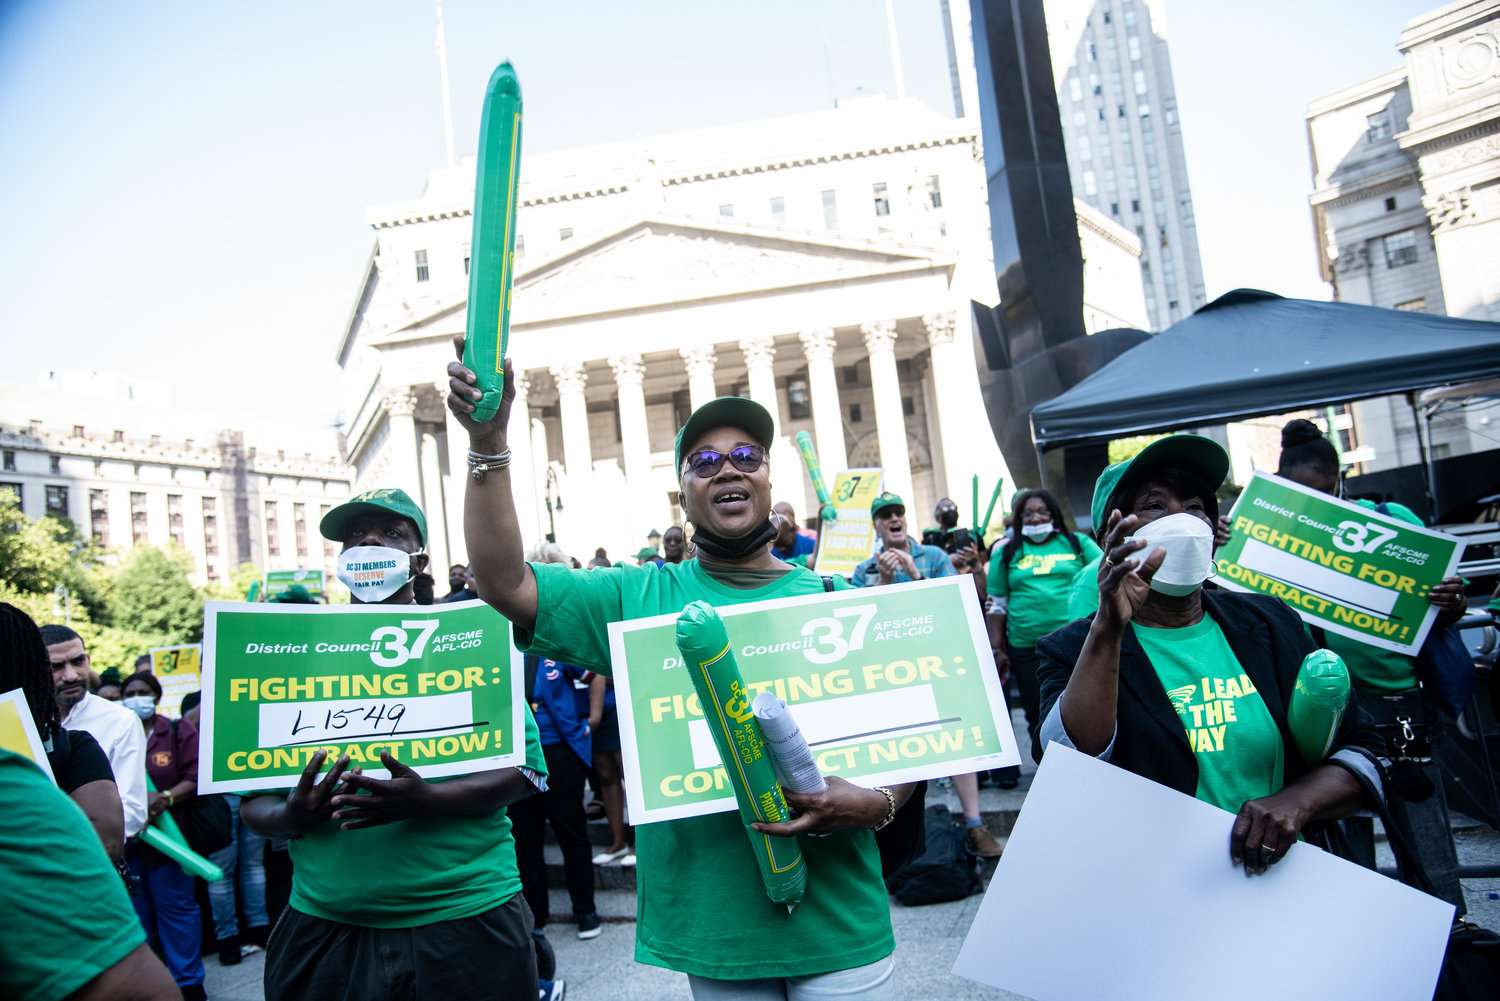 District Council 37 members during a June 2022 rally at Foley Square ahead of the start of talks on a new contract. During recent negotiations, the city is said to have been reconsidering its earlier outright refusal to give some municipal workers a telework/hybrid option.